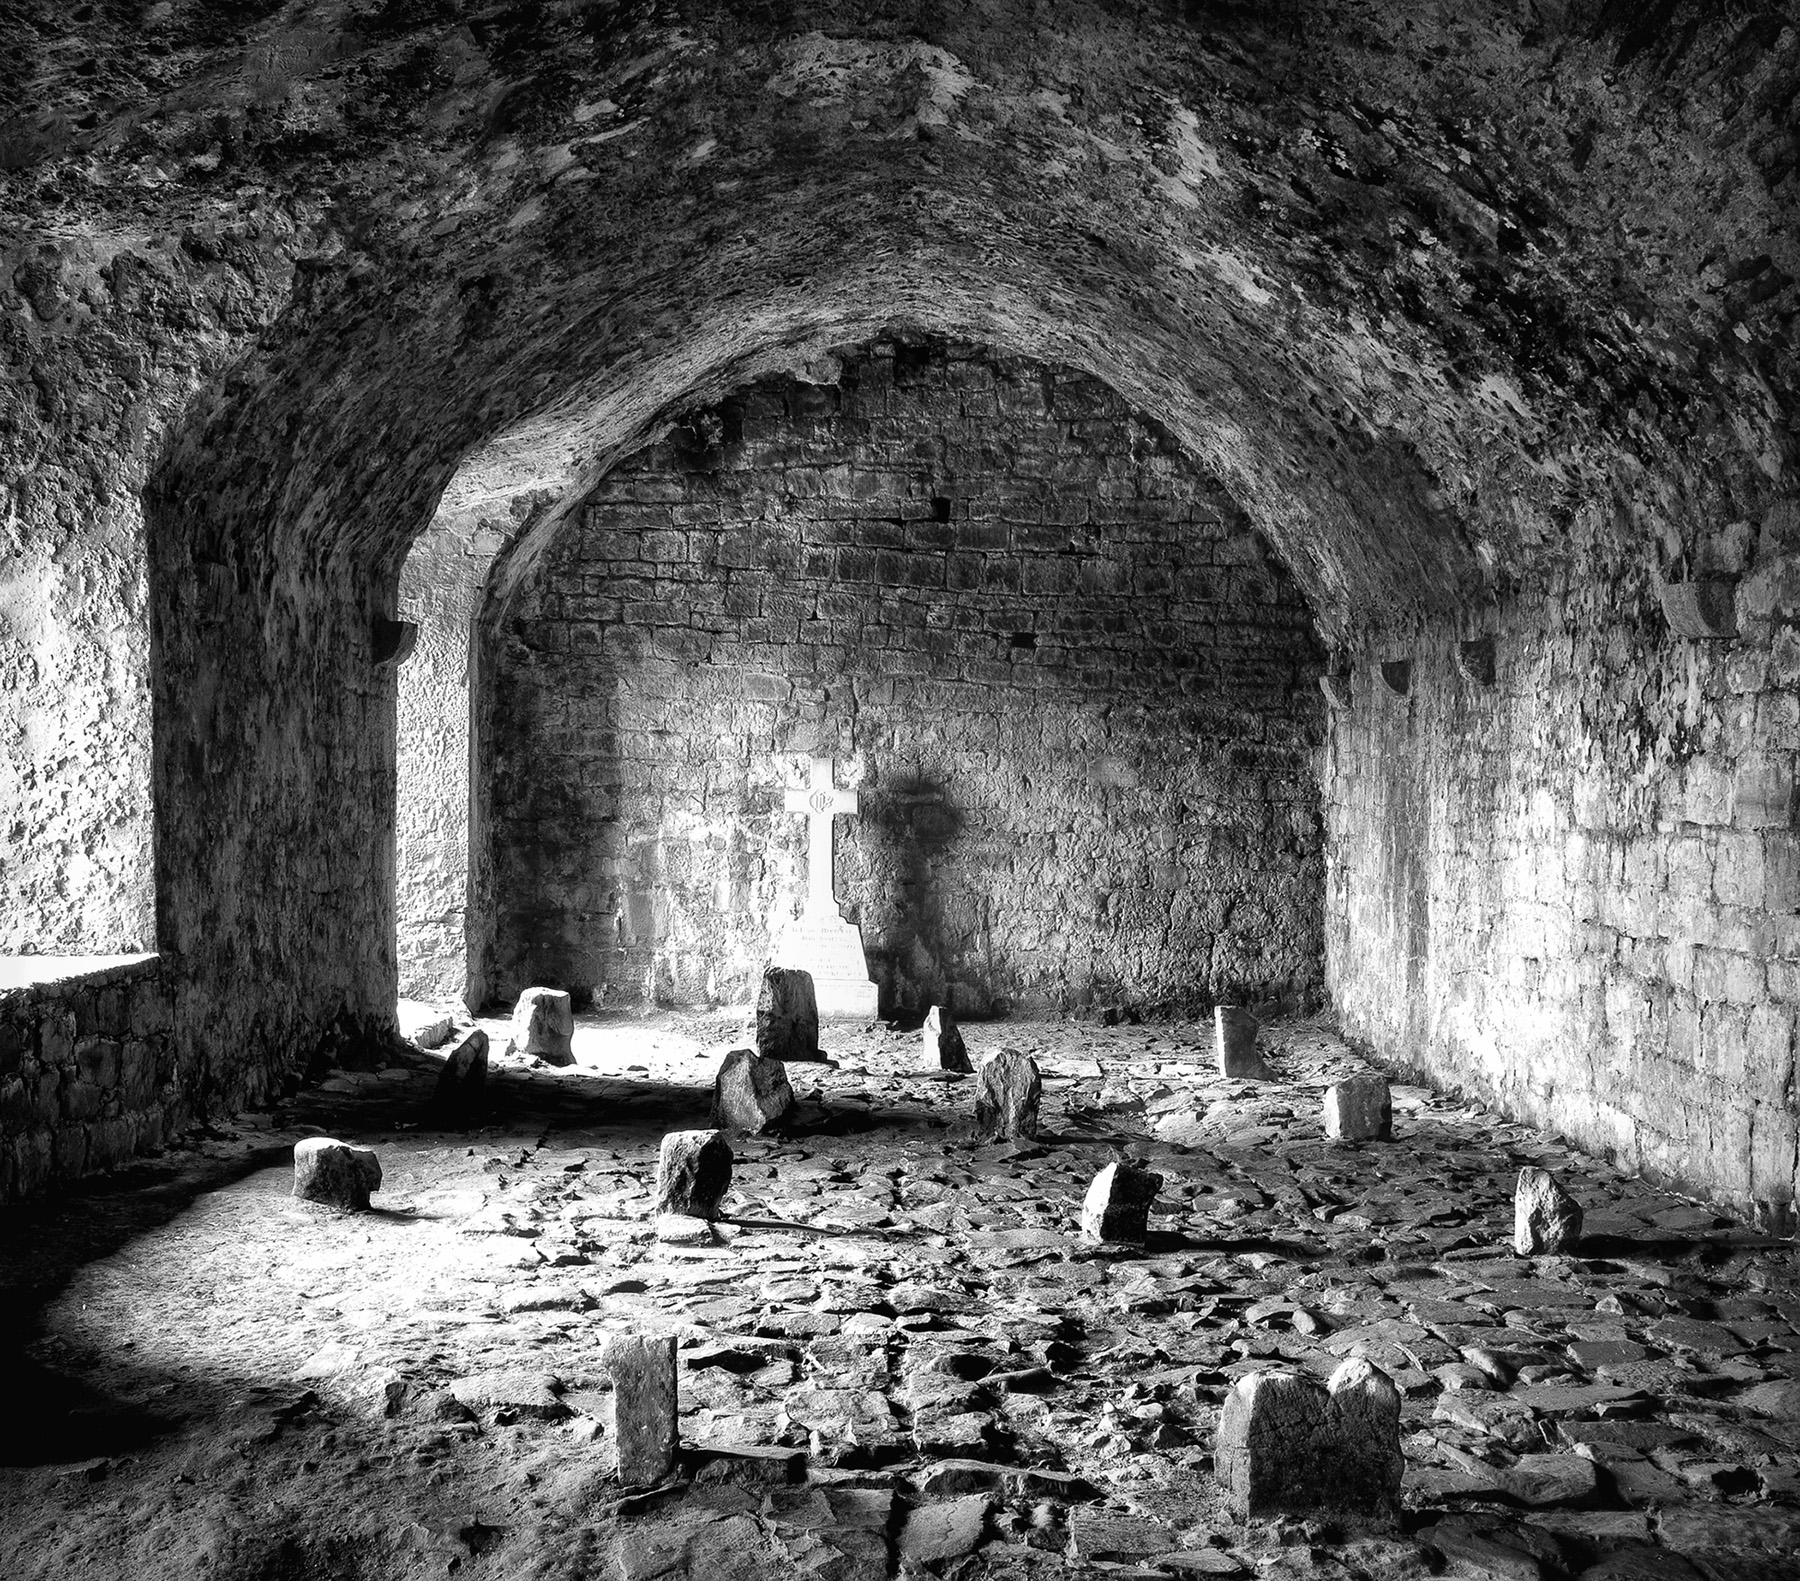  Richard Lapping,  Cloisters, Quin Abbey, Ireland , Photograph, 20x24 